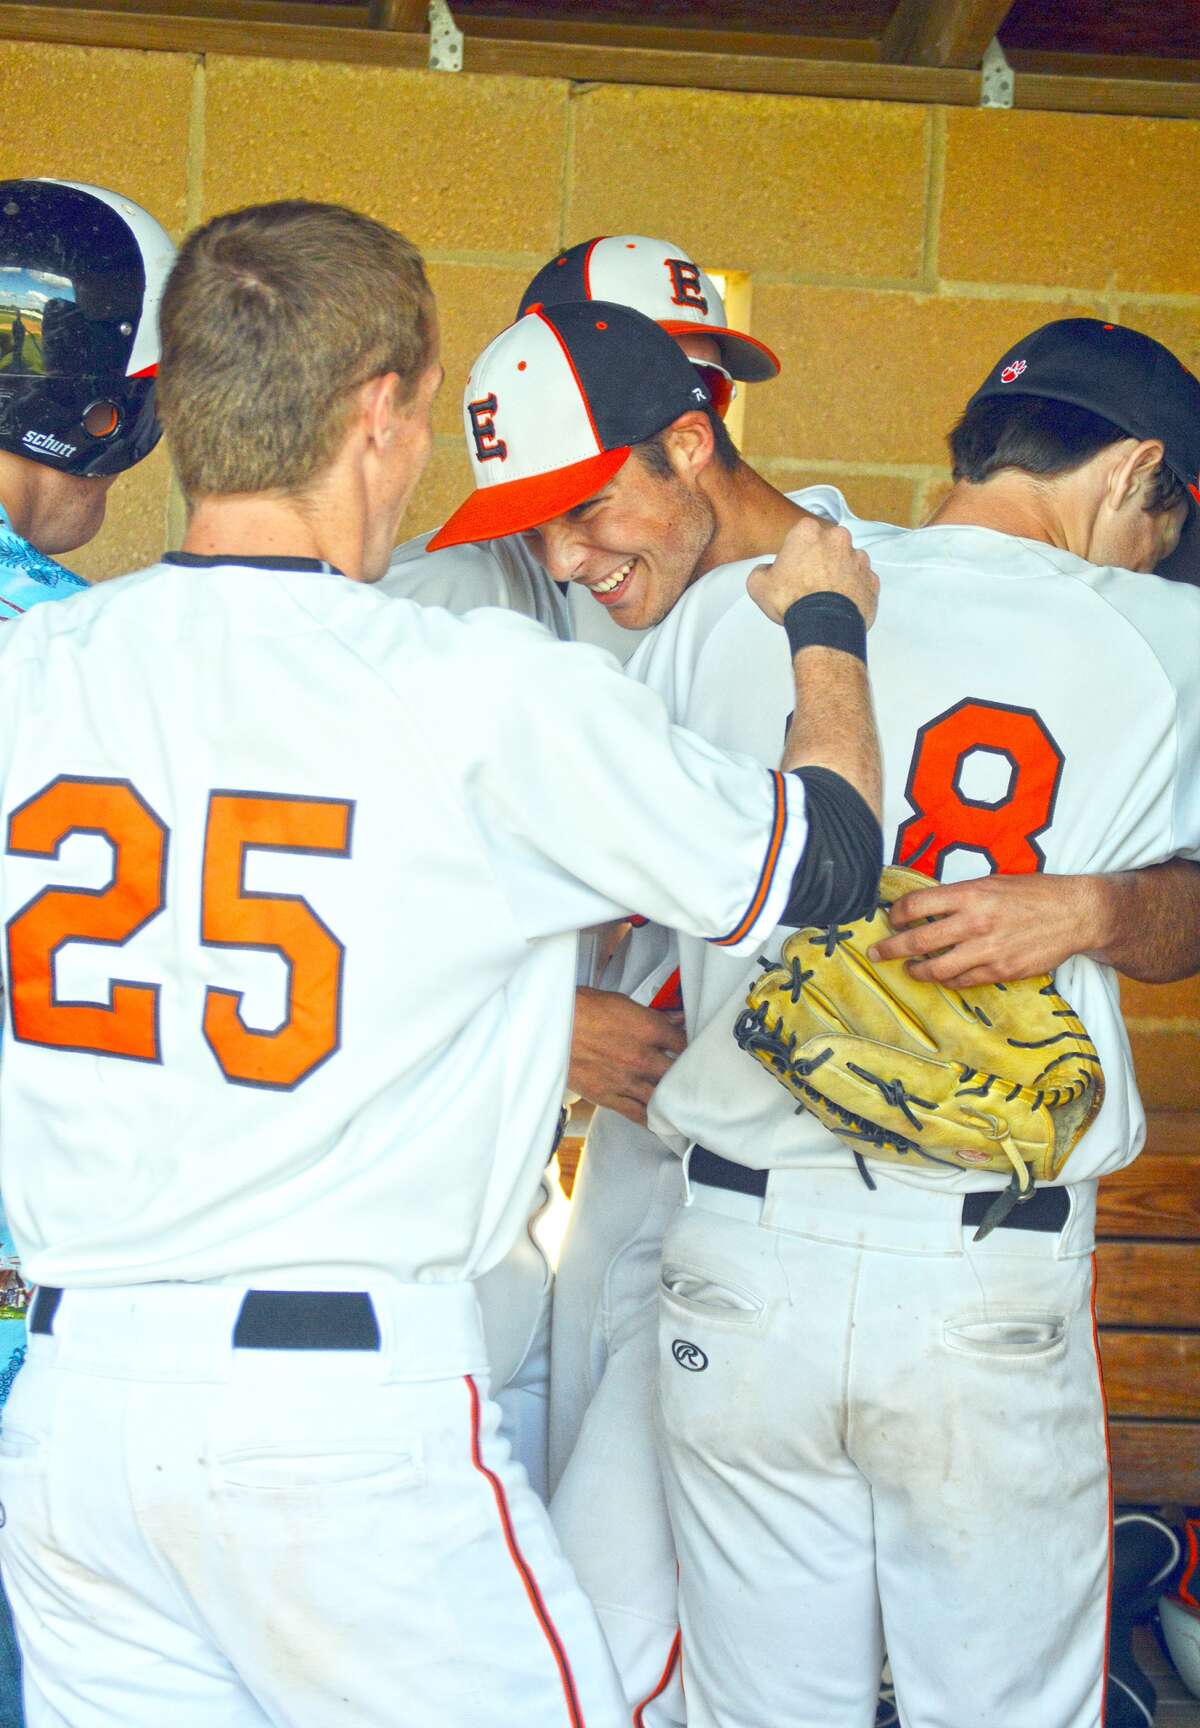 Edwardsville’s Joel Mueller is congratulated by his teammates after a base hit in the sixth inning.